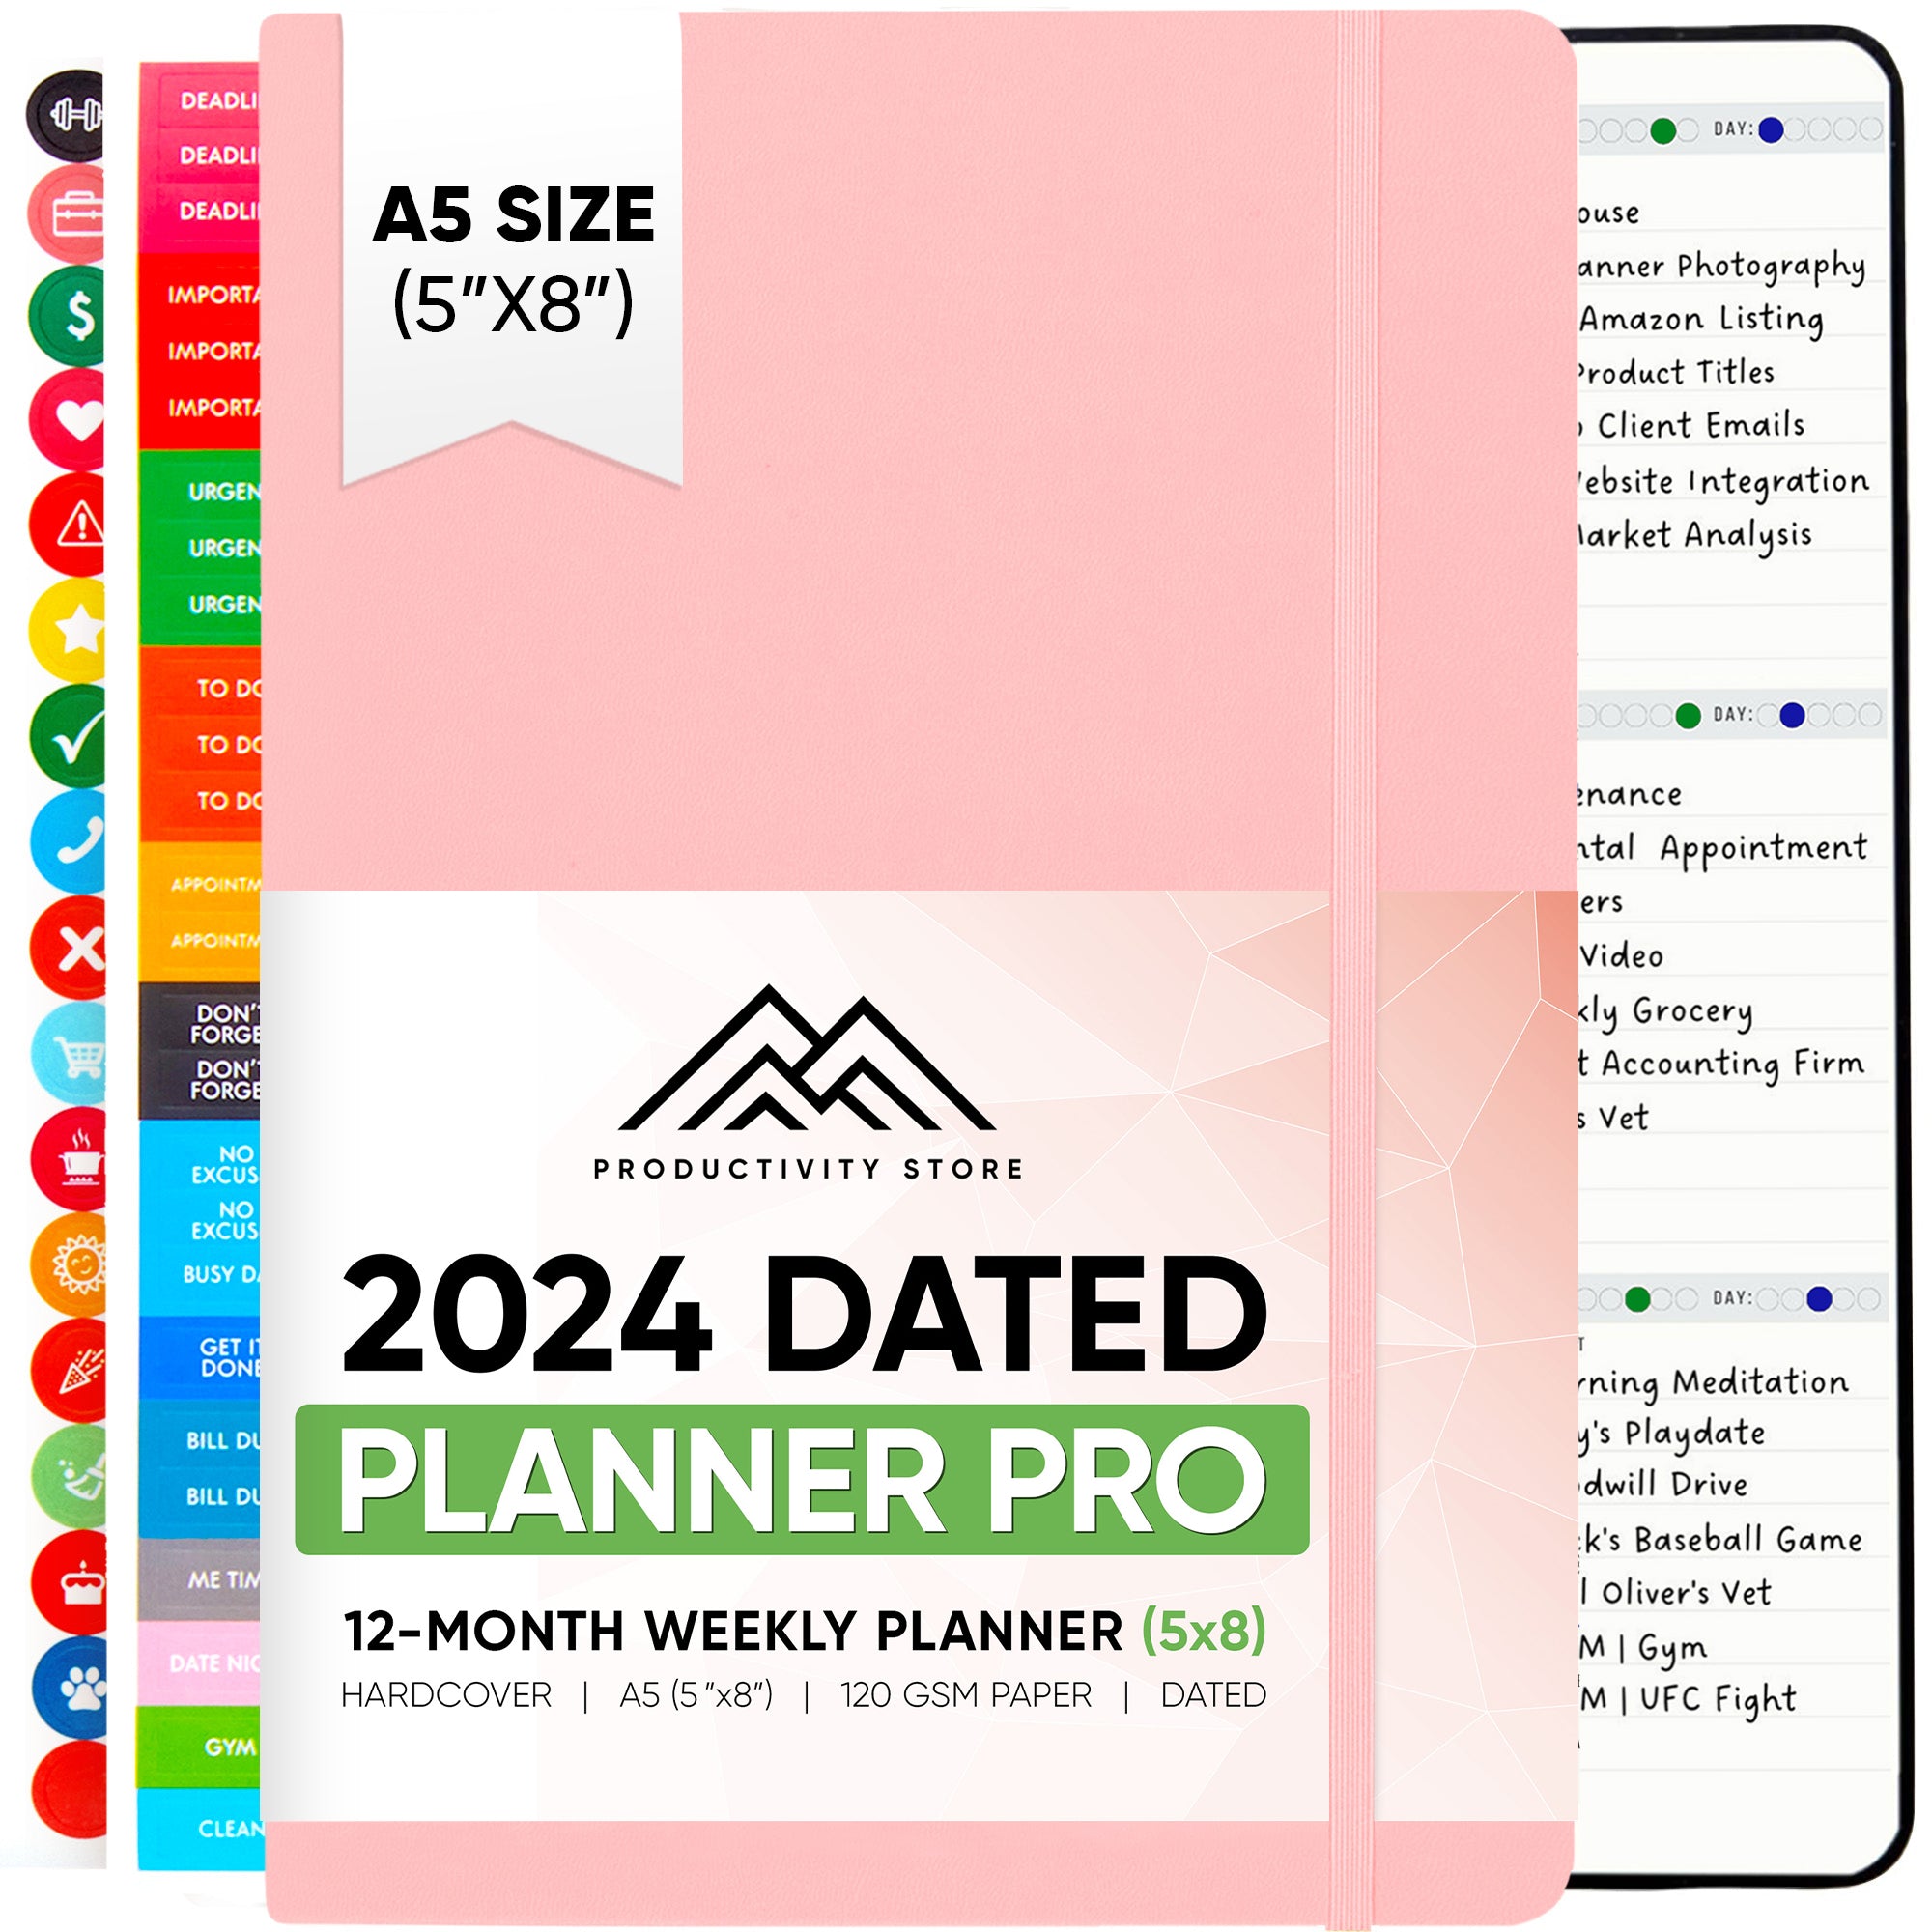 2024 Monthly to Do List 2024 Printable Todo List 2024 Monthly Planner 2024  Monthly Notes Vertical Daily to Do List Checklist PDF A4 Letter 